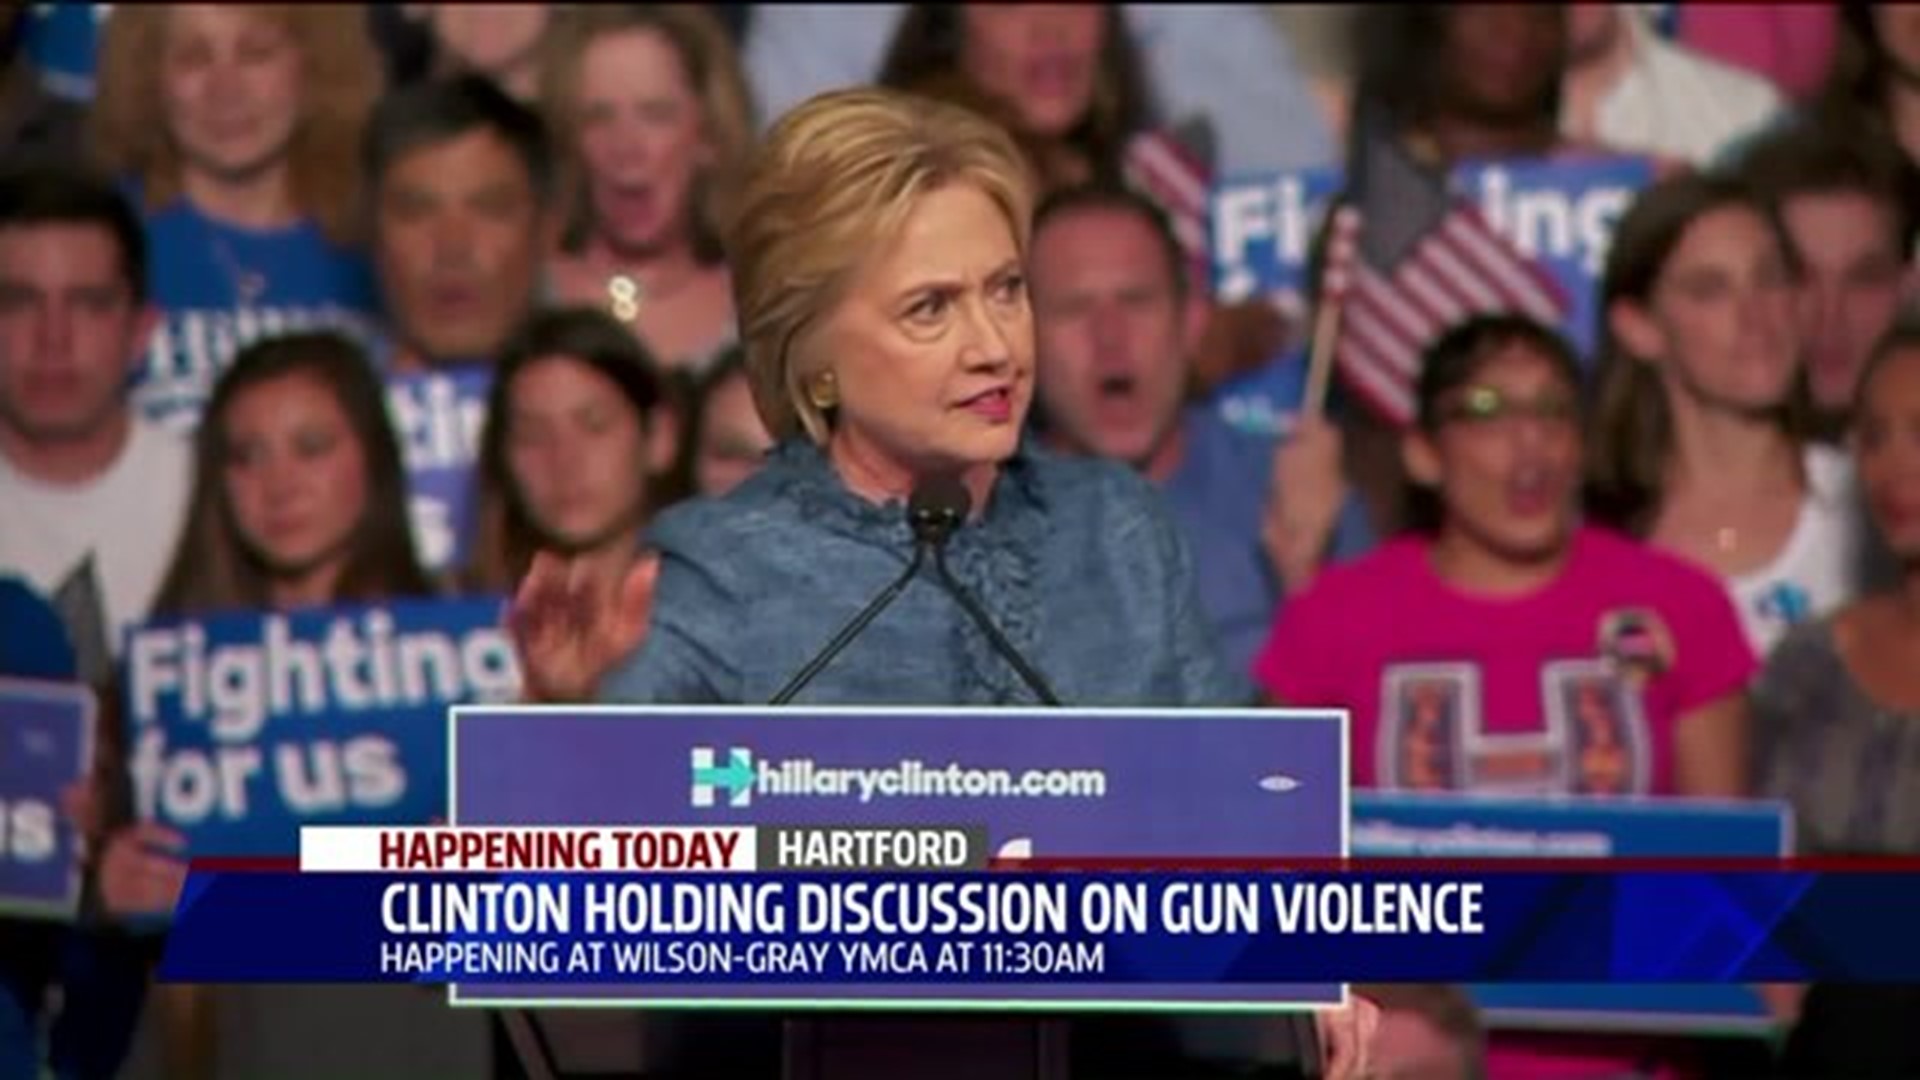 Clinton in state to discuss gun safety